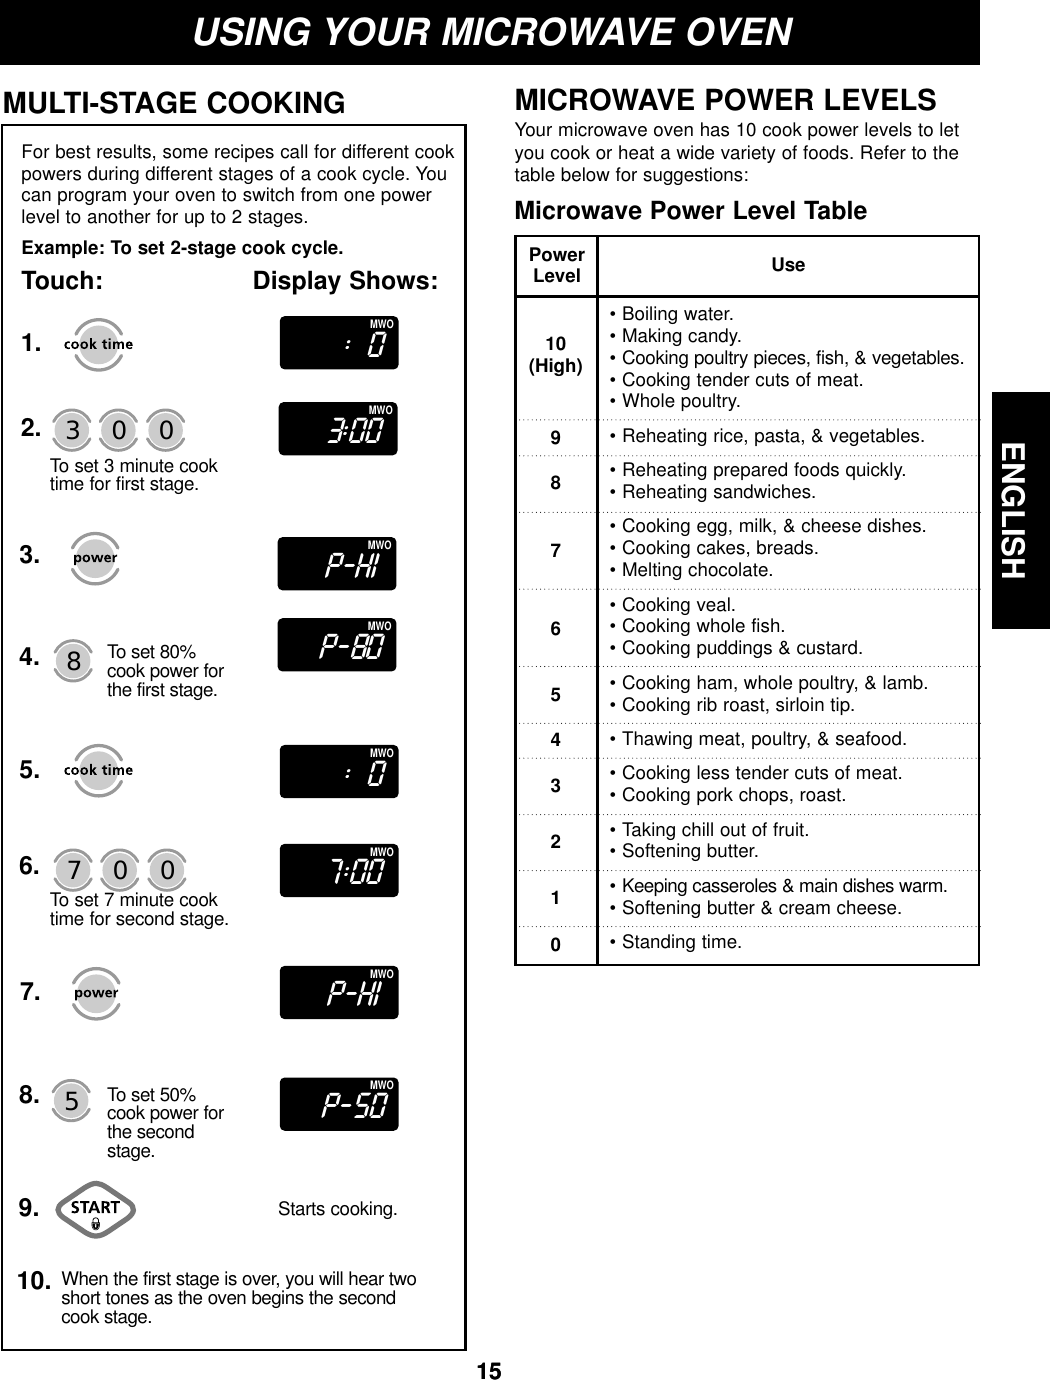 ENGLISH15ENGLISH15USING YOUR MICROWAVE OVEN30 070 08MICROWAVE POWER LEVELSYour microwave oven has 10 cook power levels to letyou cook or heat a wide variety of foods. Refer to thetable below for suggestions:Microwave Power Level Table• Boiling water.• Making candy.• Cooking poultry pieces, fish, &amp; vegetables.• Cooking tender cuts of meat.• Whole poultry.• Reheating rice, pasta, &amp; vegetables.• Reheating prepared foods quickly.• Reheating sandwiches.• Cooking egg, milk, &amp; cheese dishes.• Cooking cakes, breads.• Melting chocolate.• Cooking veal.• Cooking whole fish.• Cooking puddings &amp; custard.• Cooking ham, whole poultry, &amp; lamb.• Cooking rib roast, sirloin tip.• Thawing meat, poultry, &amp; seafood.• Cooking less tender cuts of meat.• Cooking pork chops, roast.• Taking chill out of fruit.• Softening butter.• Keeping casseroles &amp; main dishes warm.• Softening butter &amp; cream cheese.• Standing time.10(High)9876543210UsePowerLevelFor best results, some recipes call for different cookpowers during different stages of a cook cycle. Youcan program your oven to switch from one powerlevel to another for up to 2 stages.Example: To set 2-stage cook cycle.Touch: Display Shows:MULTI-STAGE COOKING1.2.5.3.4.6.To set 7 minute cook time for second stage.To set 3 minute cook time for first stage.7.9.58. To set 50% cook power for the secondstage.To set 80% cook power for the first stage.When the first stage is over, you will hear twoshort tones as the oven begins the secondcook stage.10.Starts cooking.:0MWO:0MWO7:00MWOp-hiMWOp-50MWO3:00MWOp-hiMWOp-8oMWO